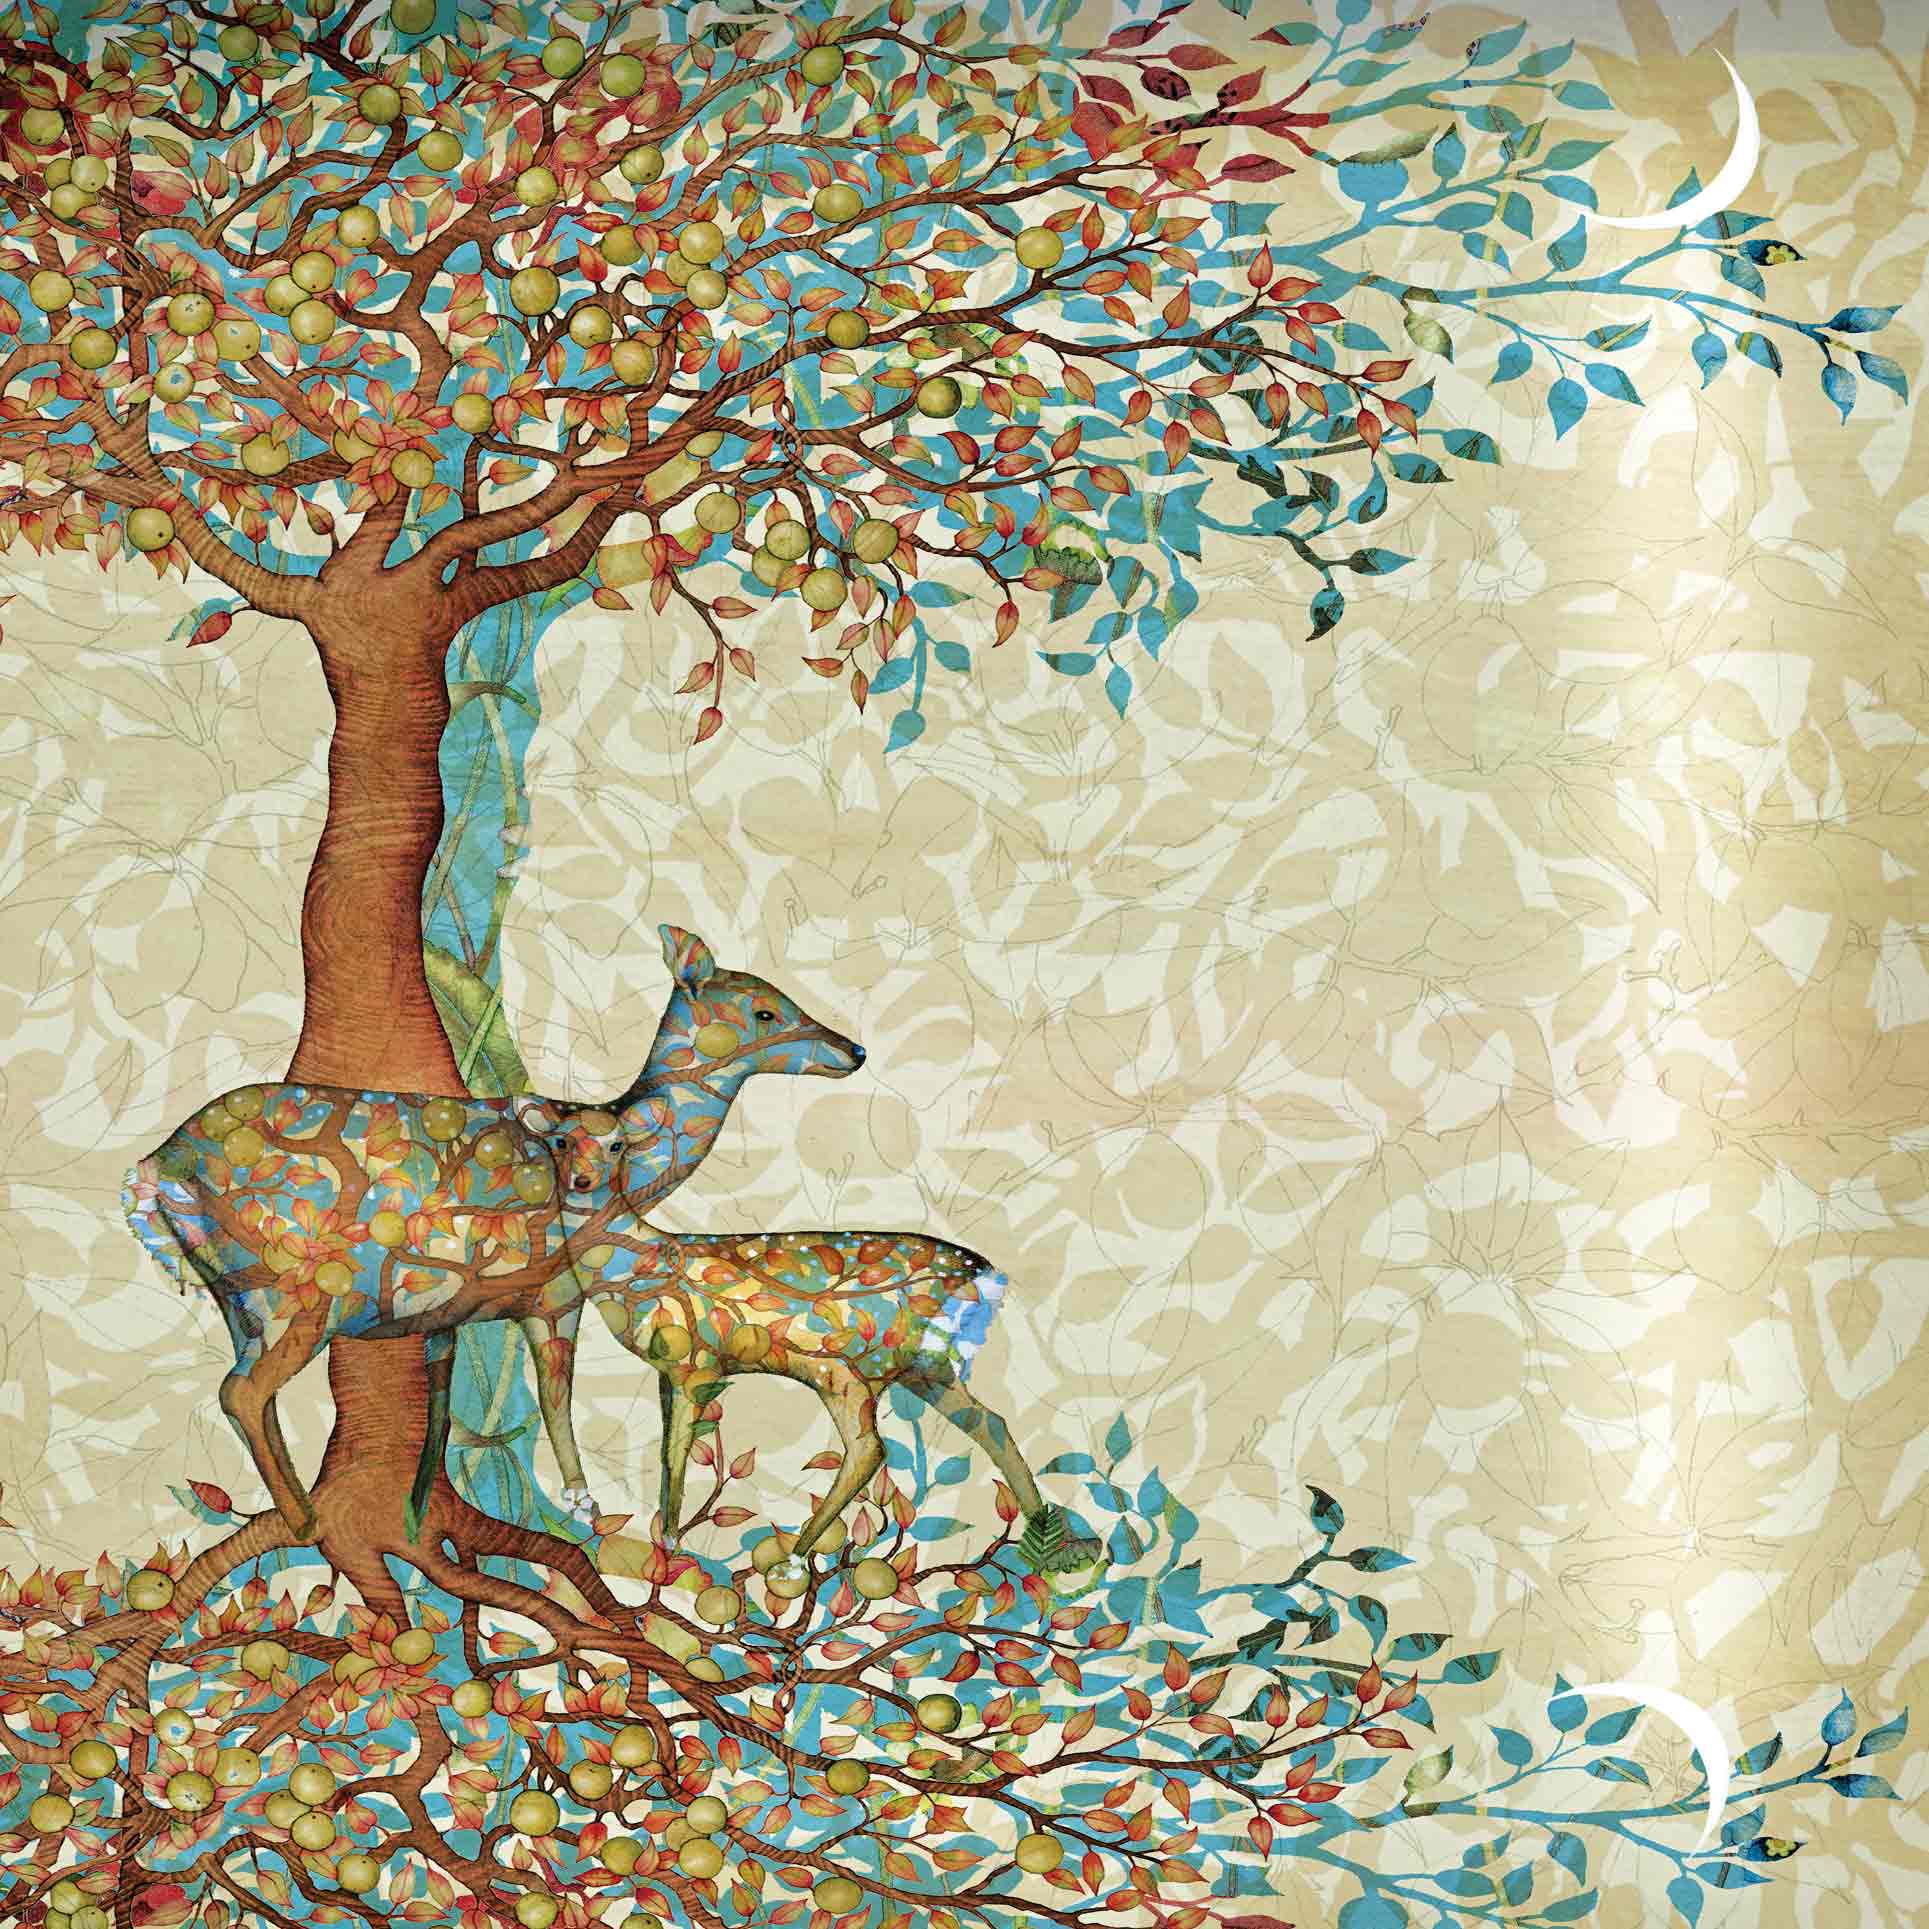 Art Greeting Card by Kate Green, Deer and Fawn, Digital Collage, Deer and fawn under a tree